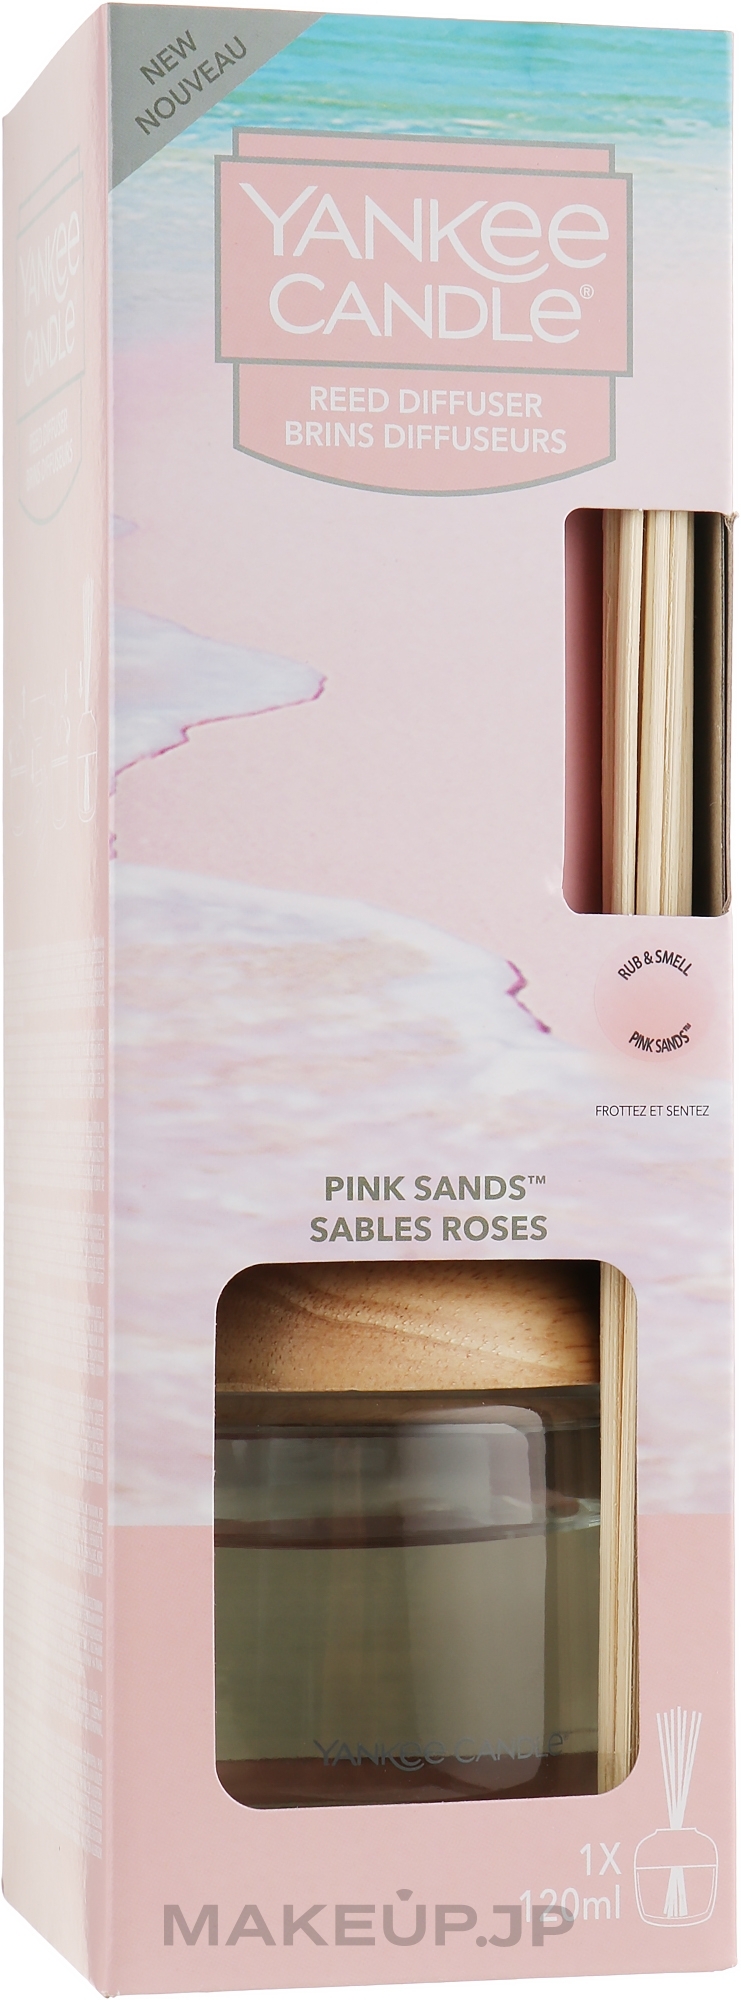 Pink Sands Reed Diffuser - Yankee Candle Pink Sands  — photo 120 ml